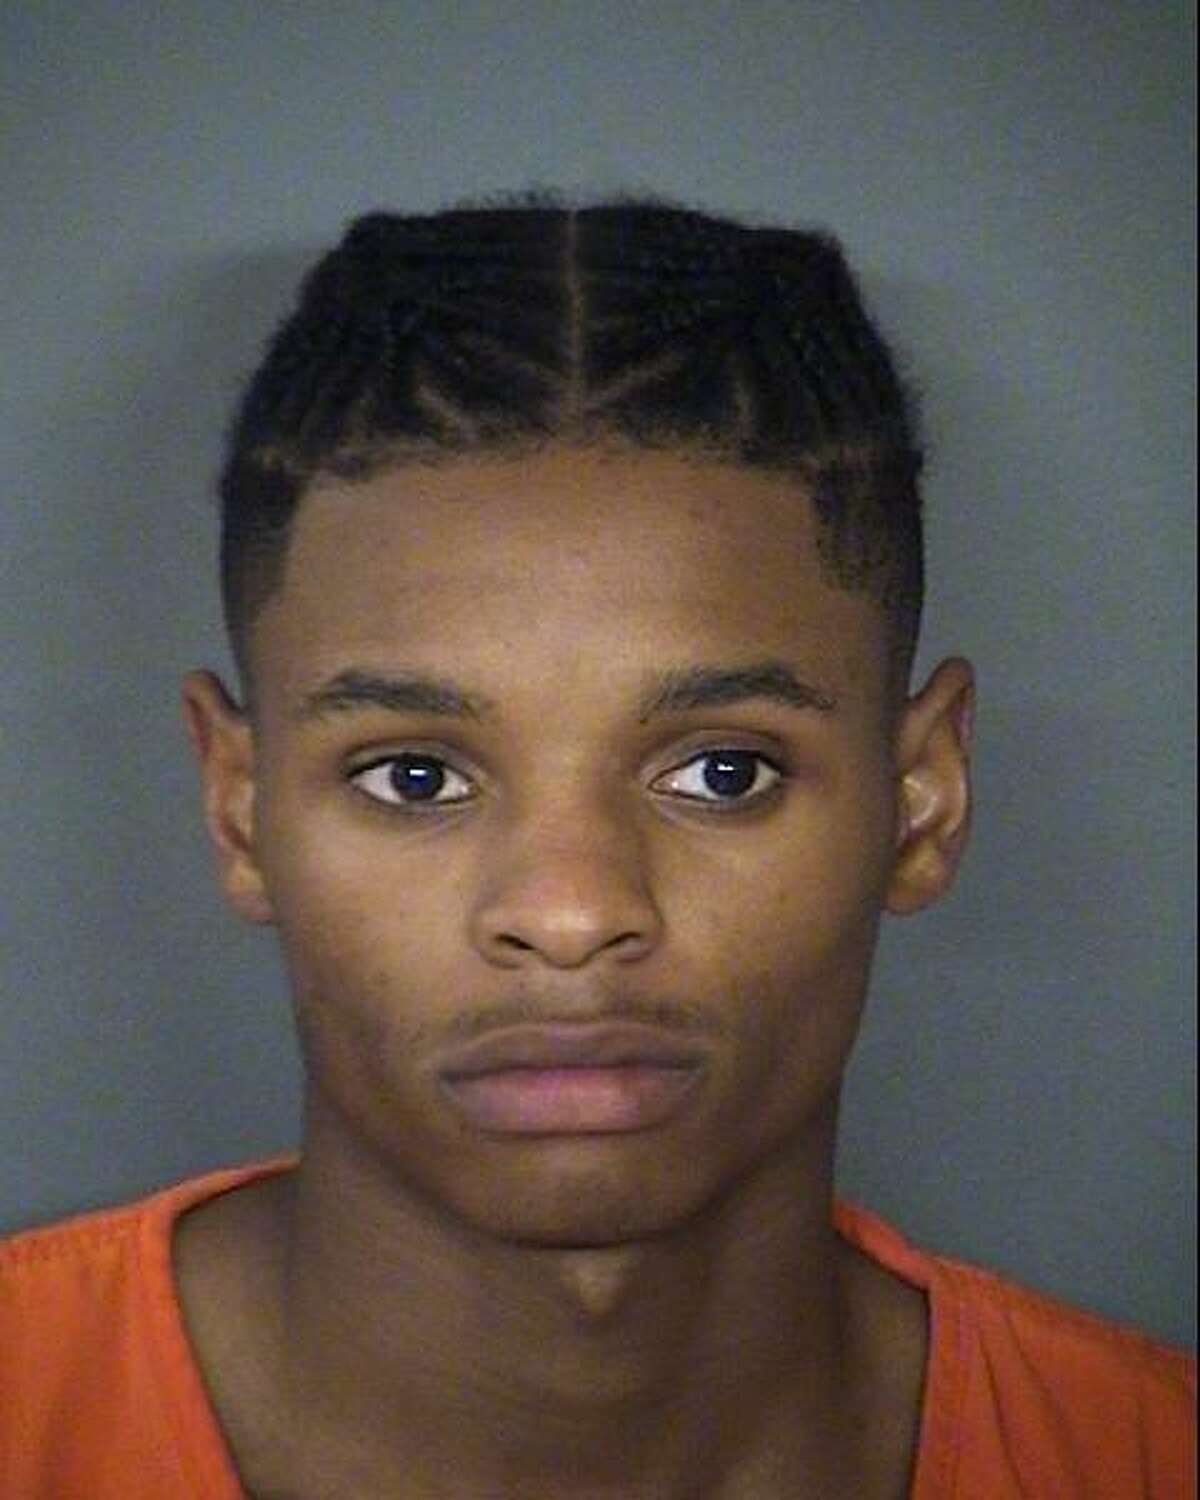 Anton Harris, 18, who was arrested Thursday at North Star Mall. He is facing four charges of sexual assault, one charge of attempted sexual assault and one charge of aggravated robbery.